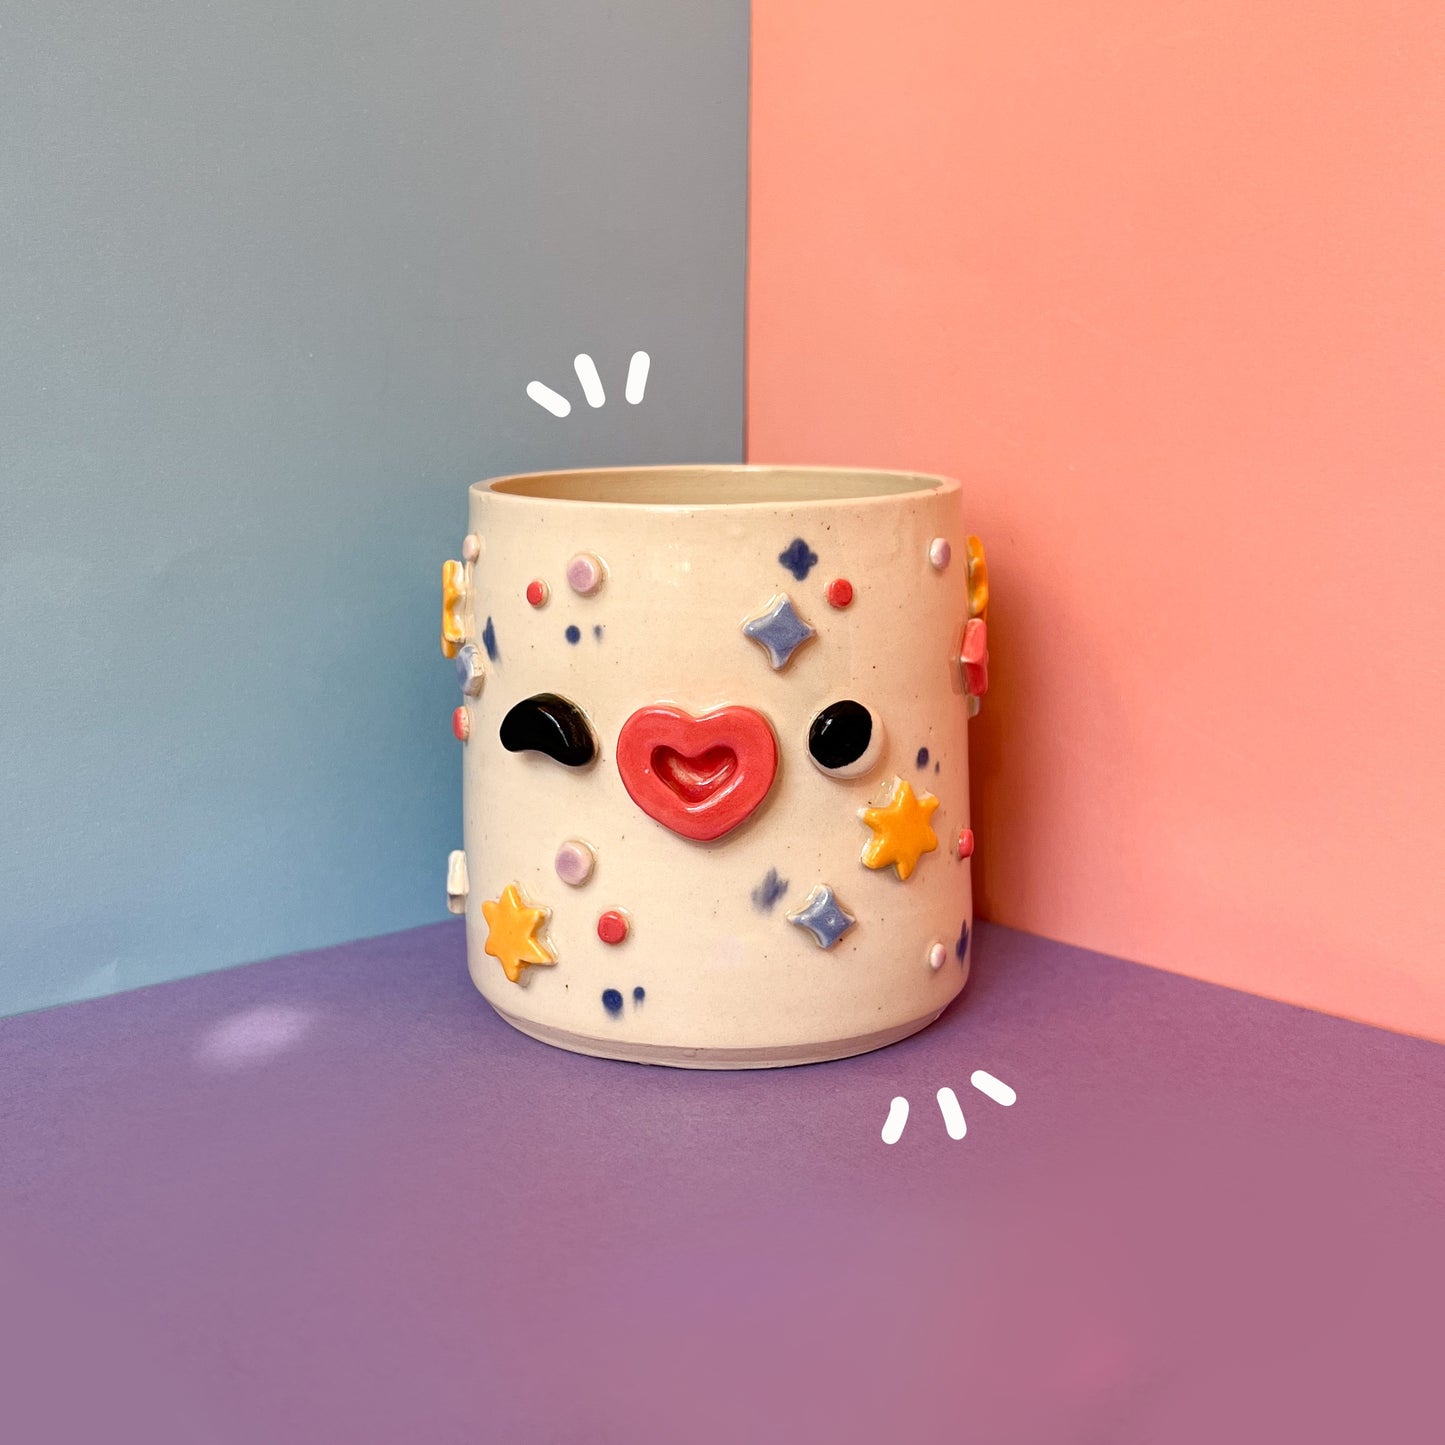 Colorful starry cup